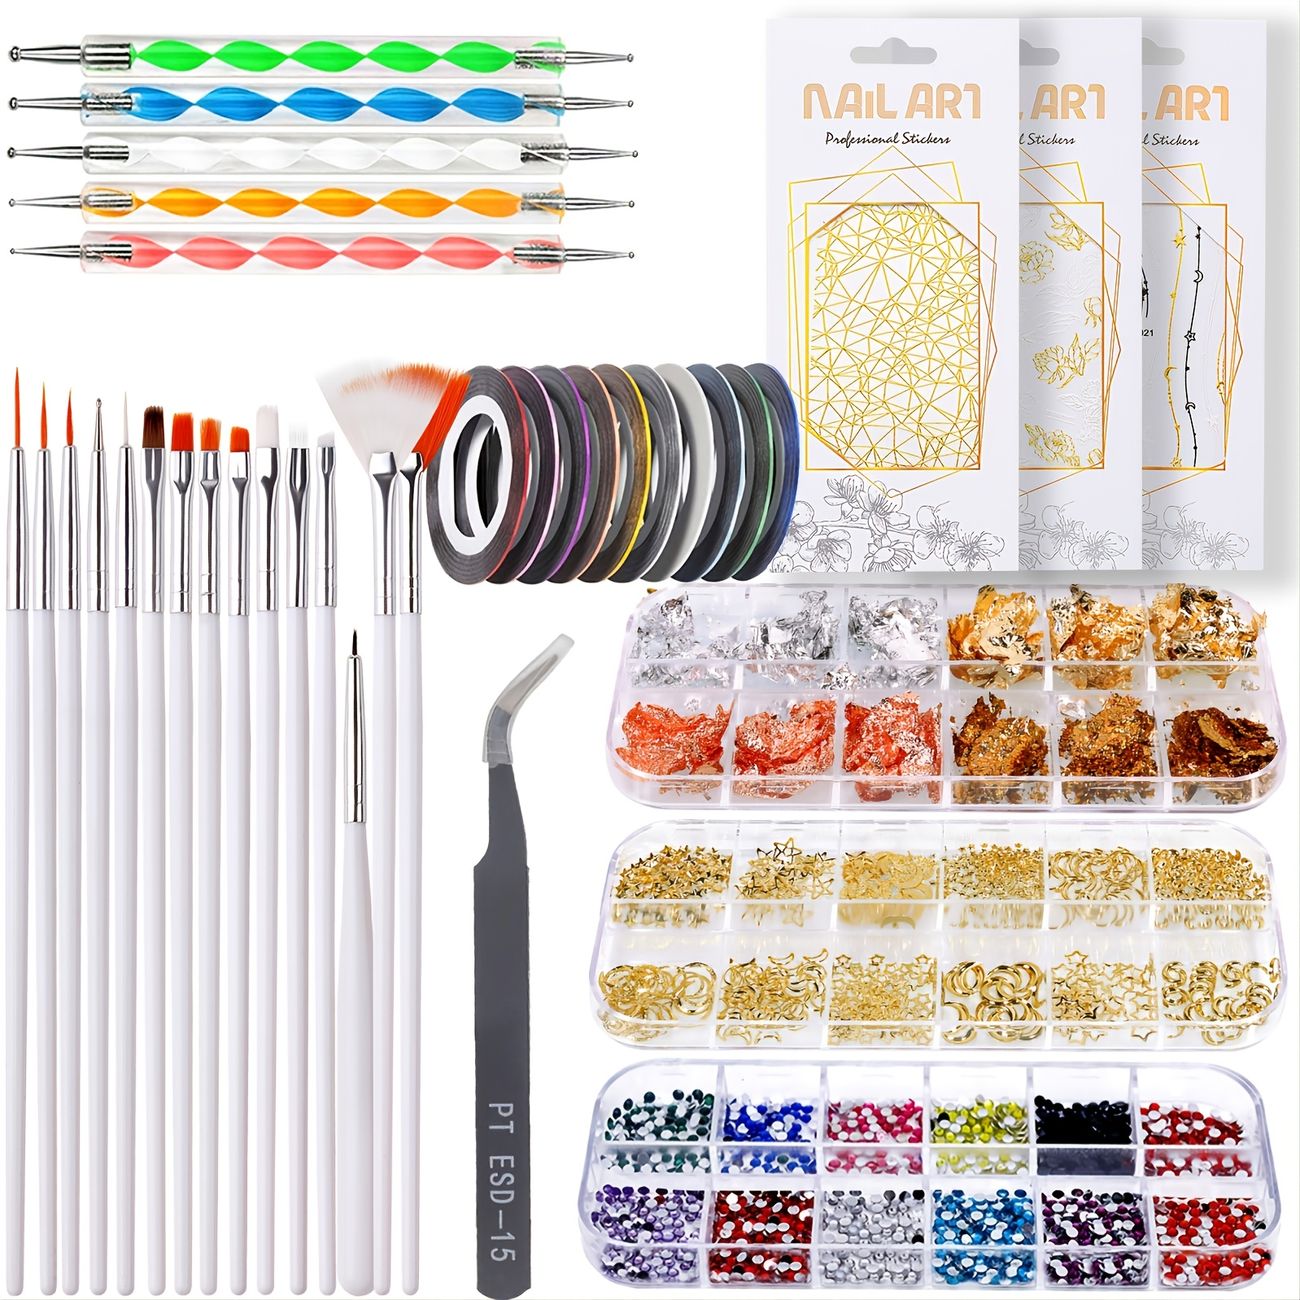 Nail Art Design Tools 3d Nail Art Decorations Kit With Nail Art Brushes  Dotting Tools Holographic Nail Art Stickers Nail Foil Tape Strips And Nails  Art Rhinestones And Pick Up Tweezers |